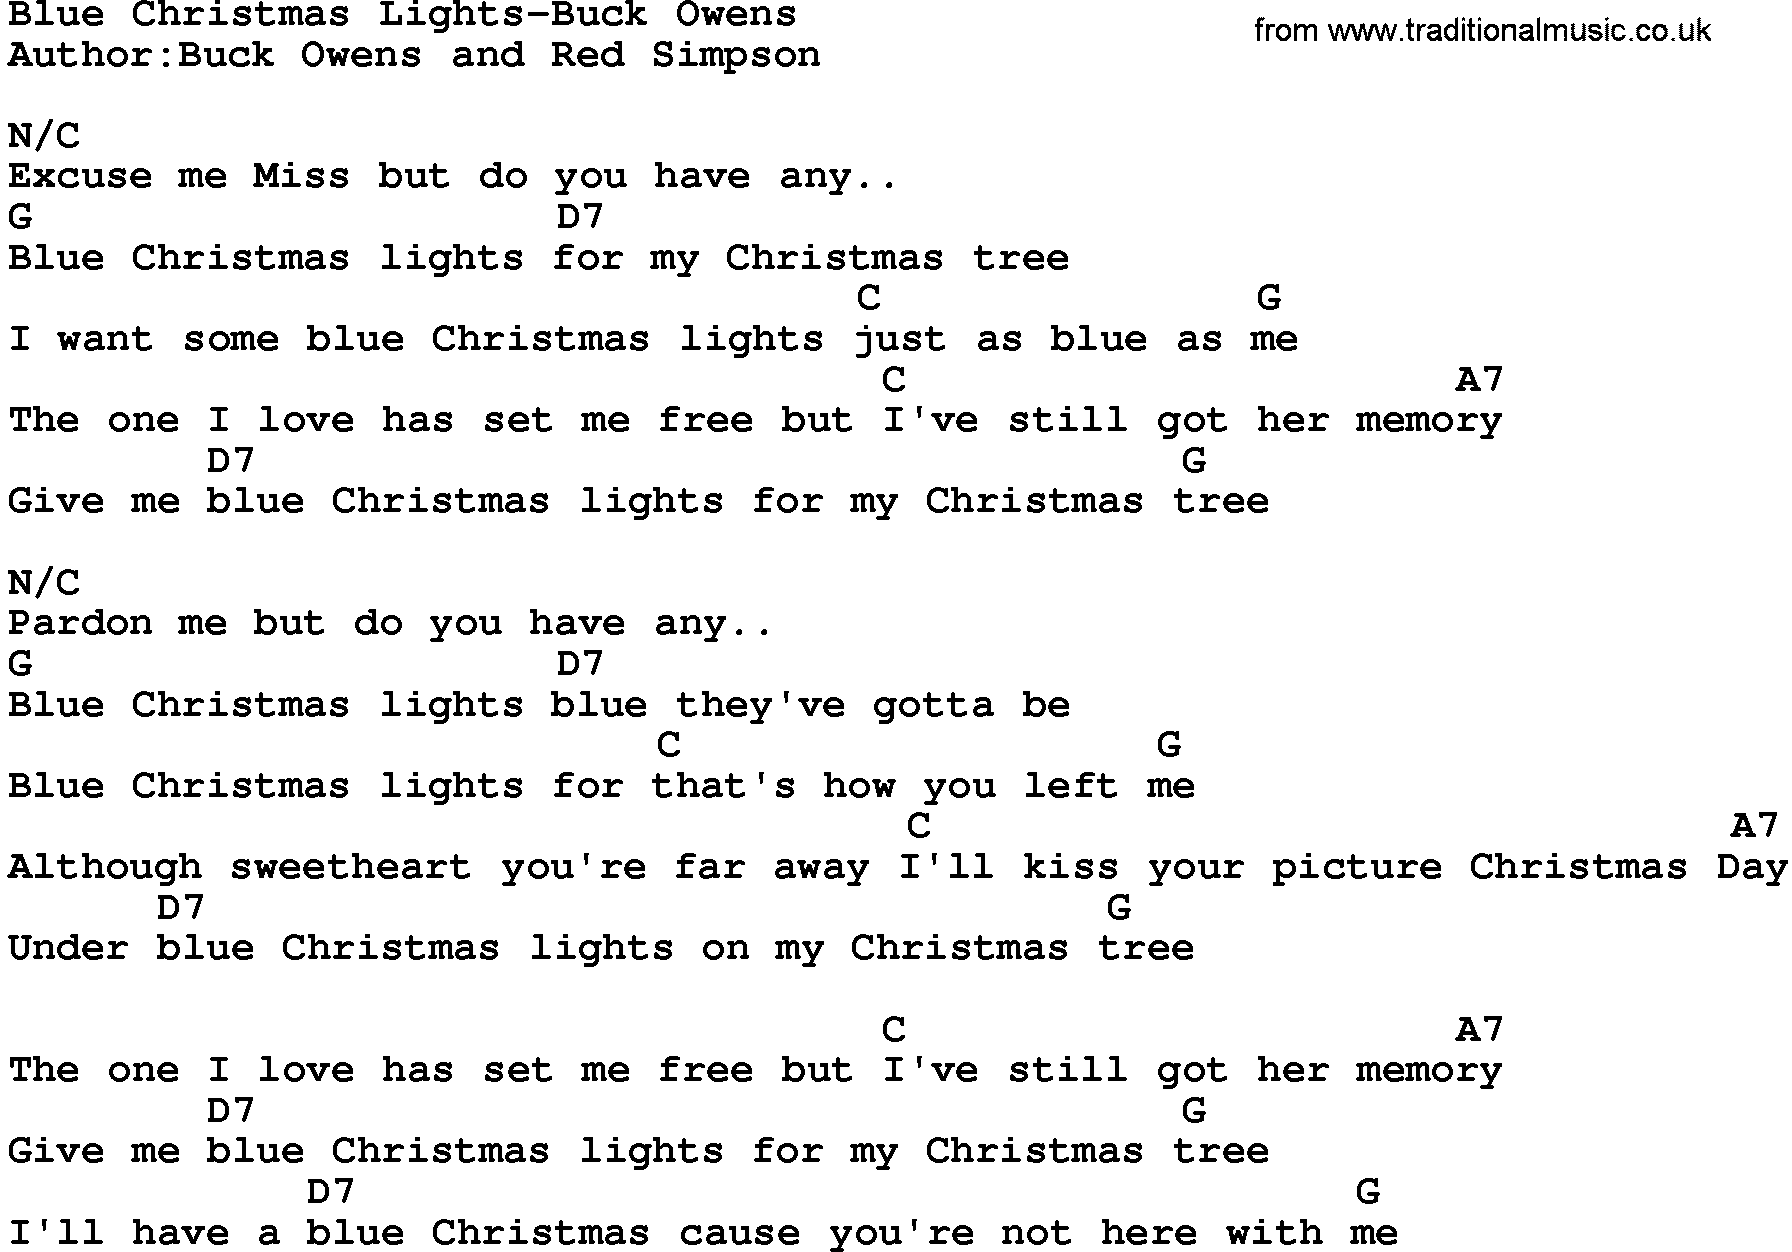 Country music song: Blue Christmas Lights-Buck Owens lyrics and chords